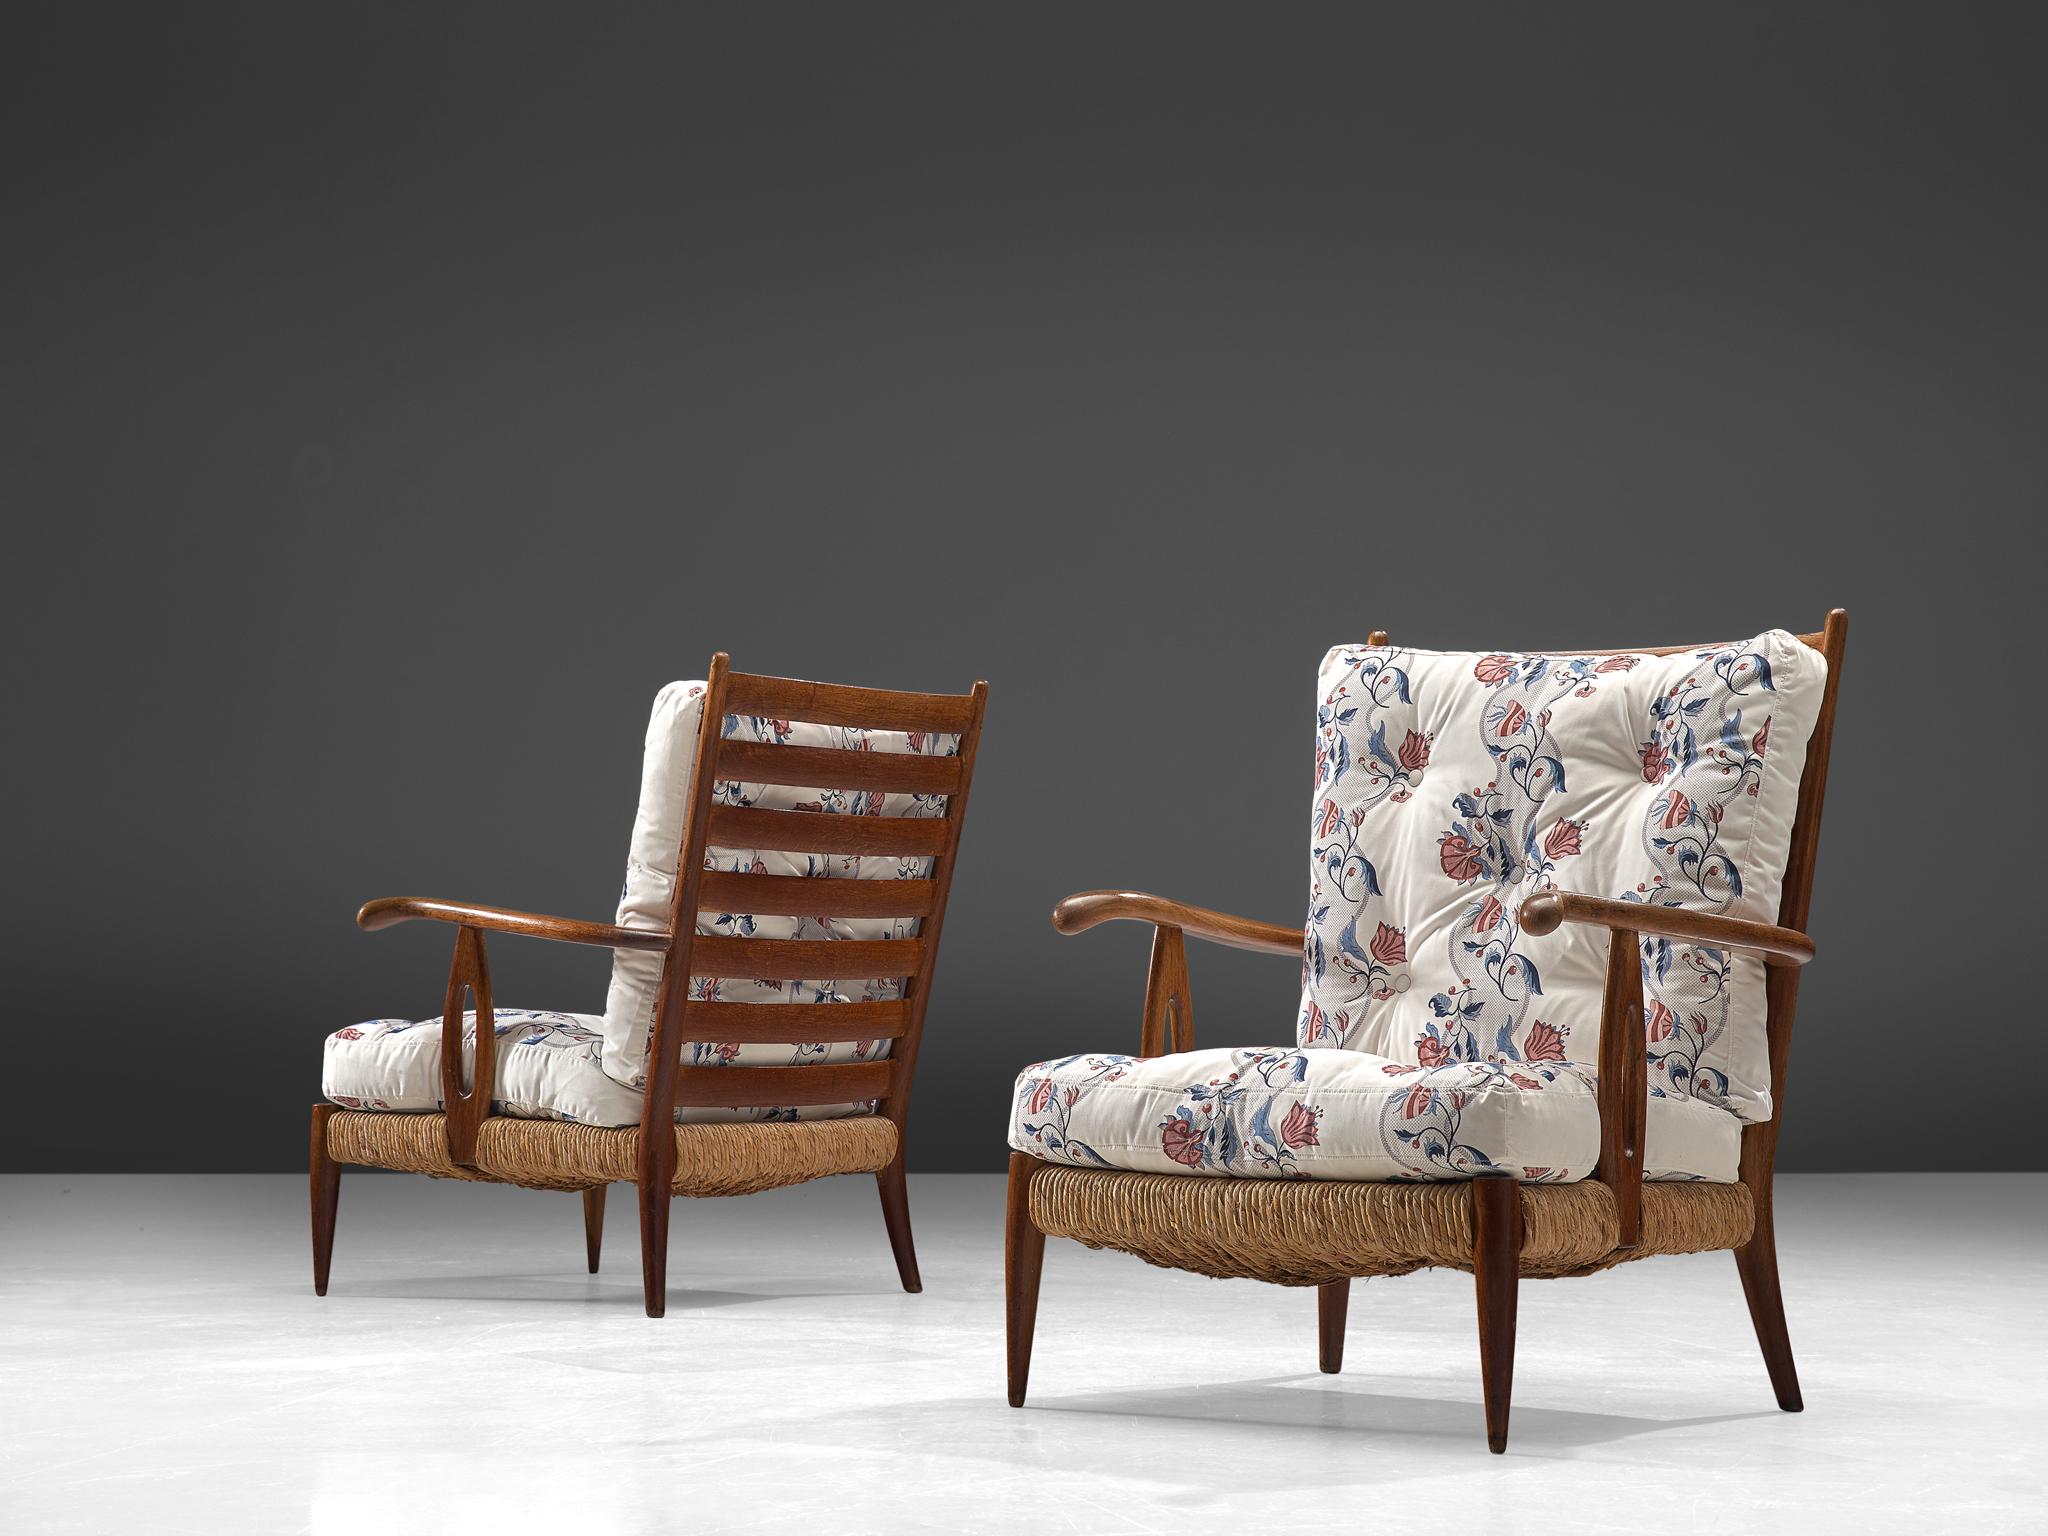 Paolo Buffa, pair of armchairs, walnut, wicker and fabric, Italy, 1950s.

This pair of wide, robust armchairs are made of wood and cane. The aesthetics of this set is natural and organic. The set features strong features that are quintessential